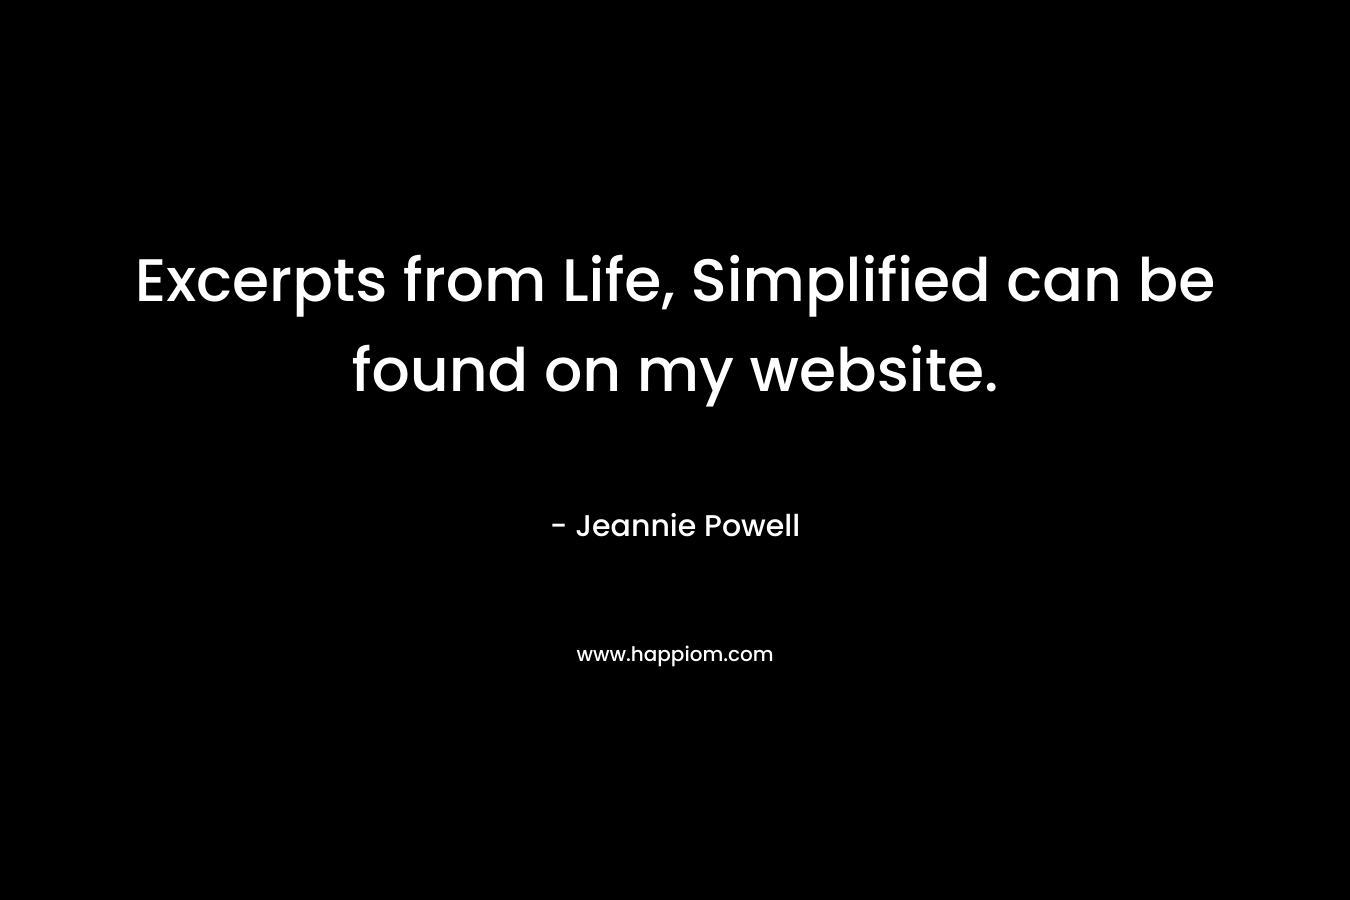 Excerpts from Life, Simplified can be found on my website. – Jeannie Powell